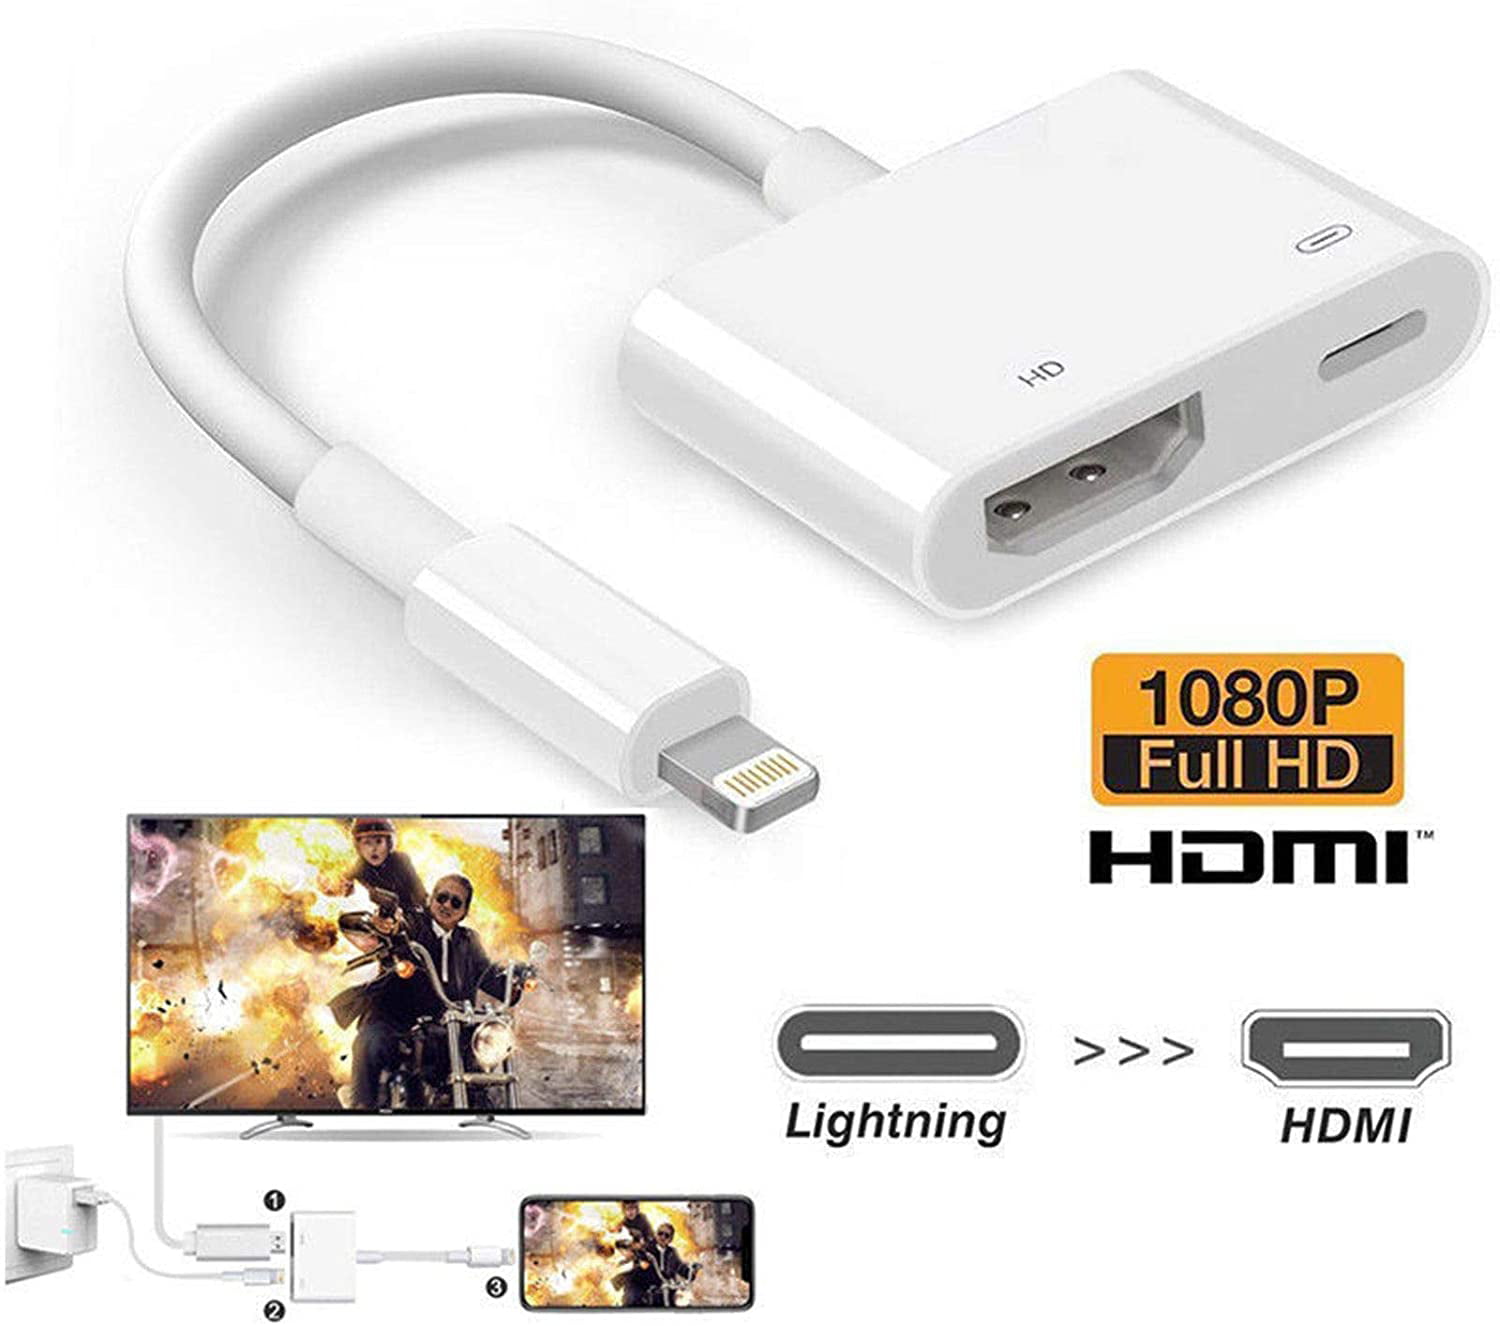 iPod iPad on HD TV/Monitor/Projector Lighting to HDMI Adapter,1080P Digital AV Adapter Sync Screen Connector with Charging Port for iPhone 11/11 Pro/XS/XR/X/8 7 White 